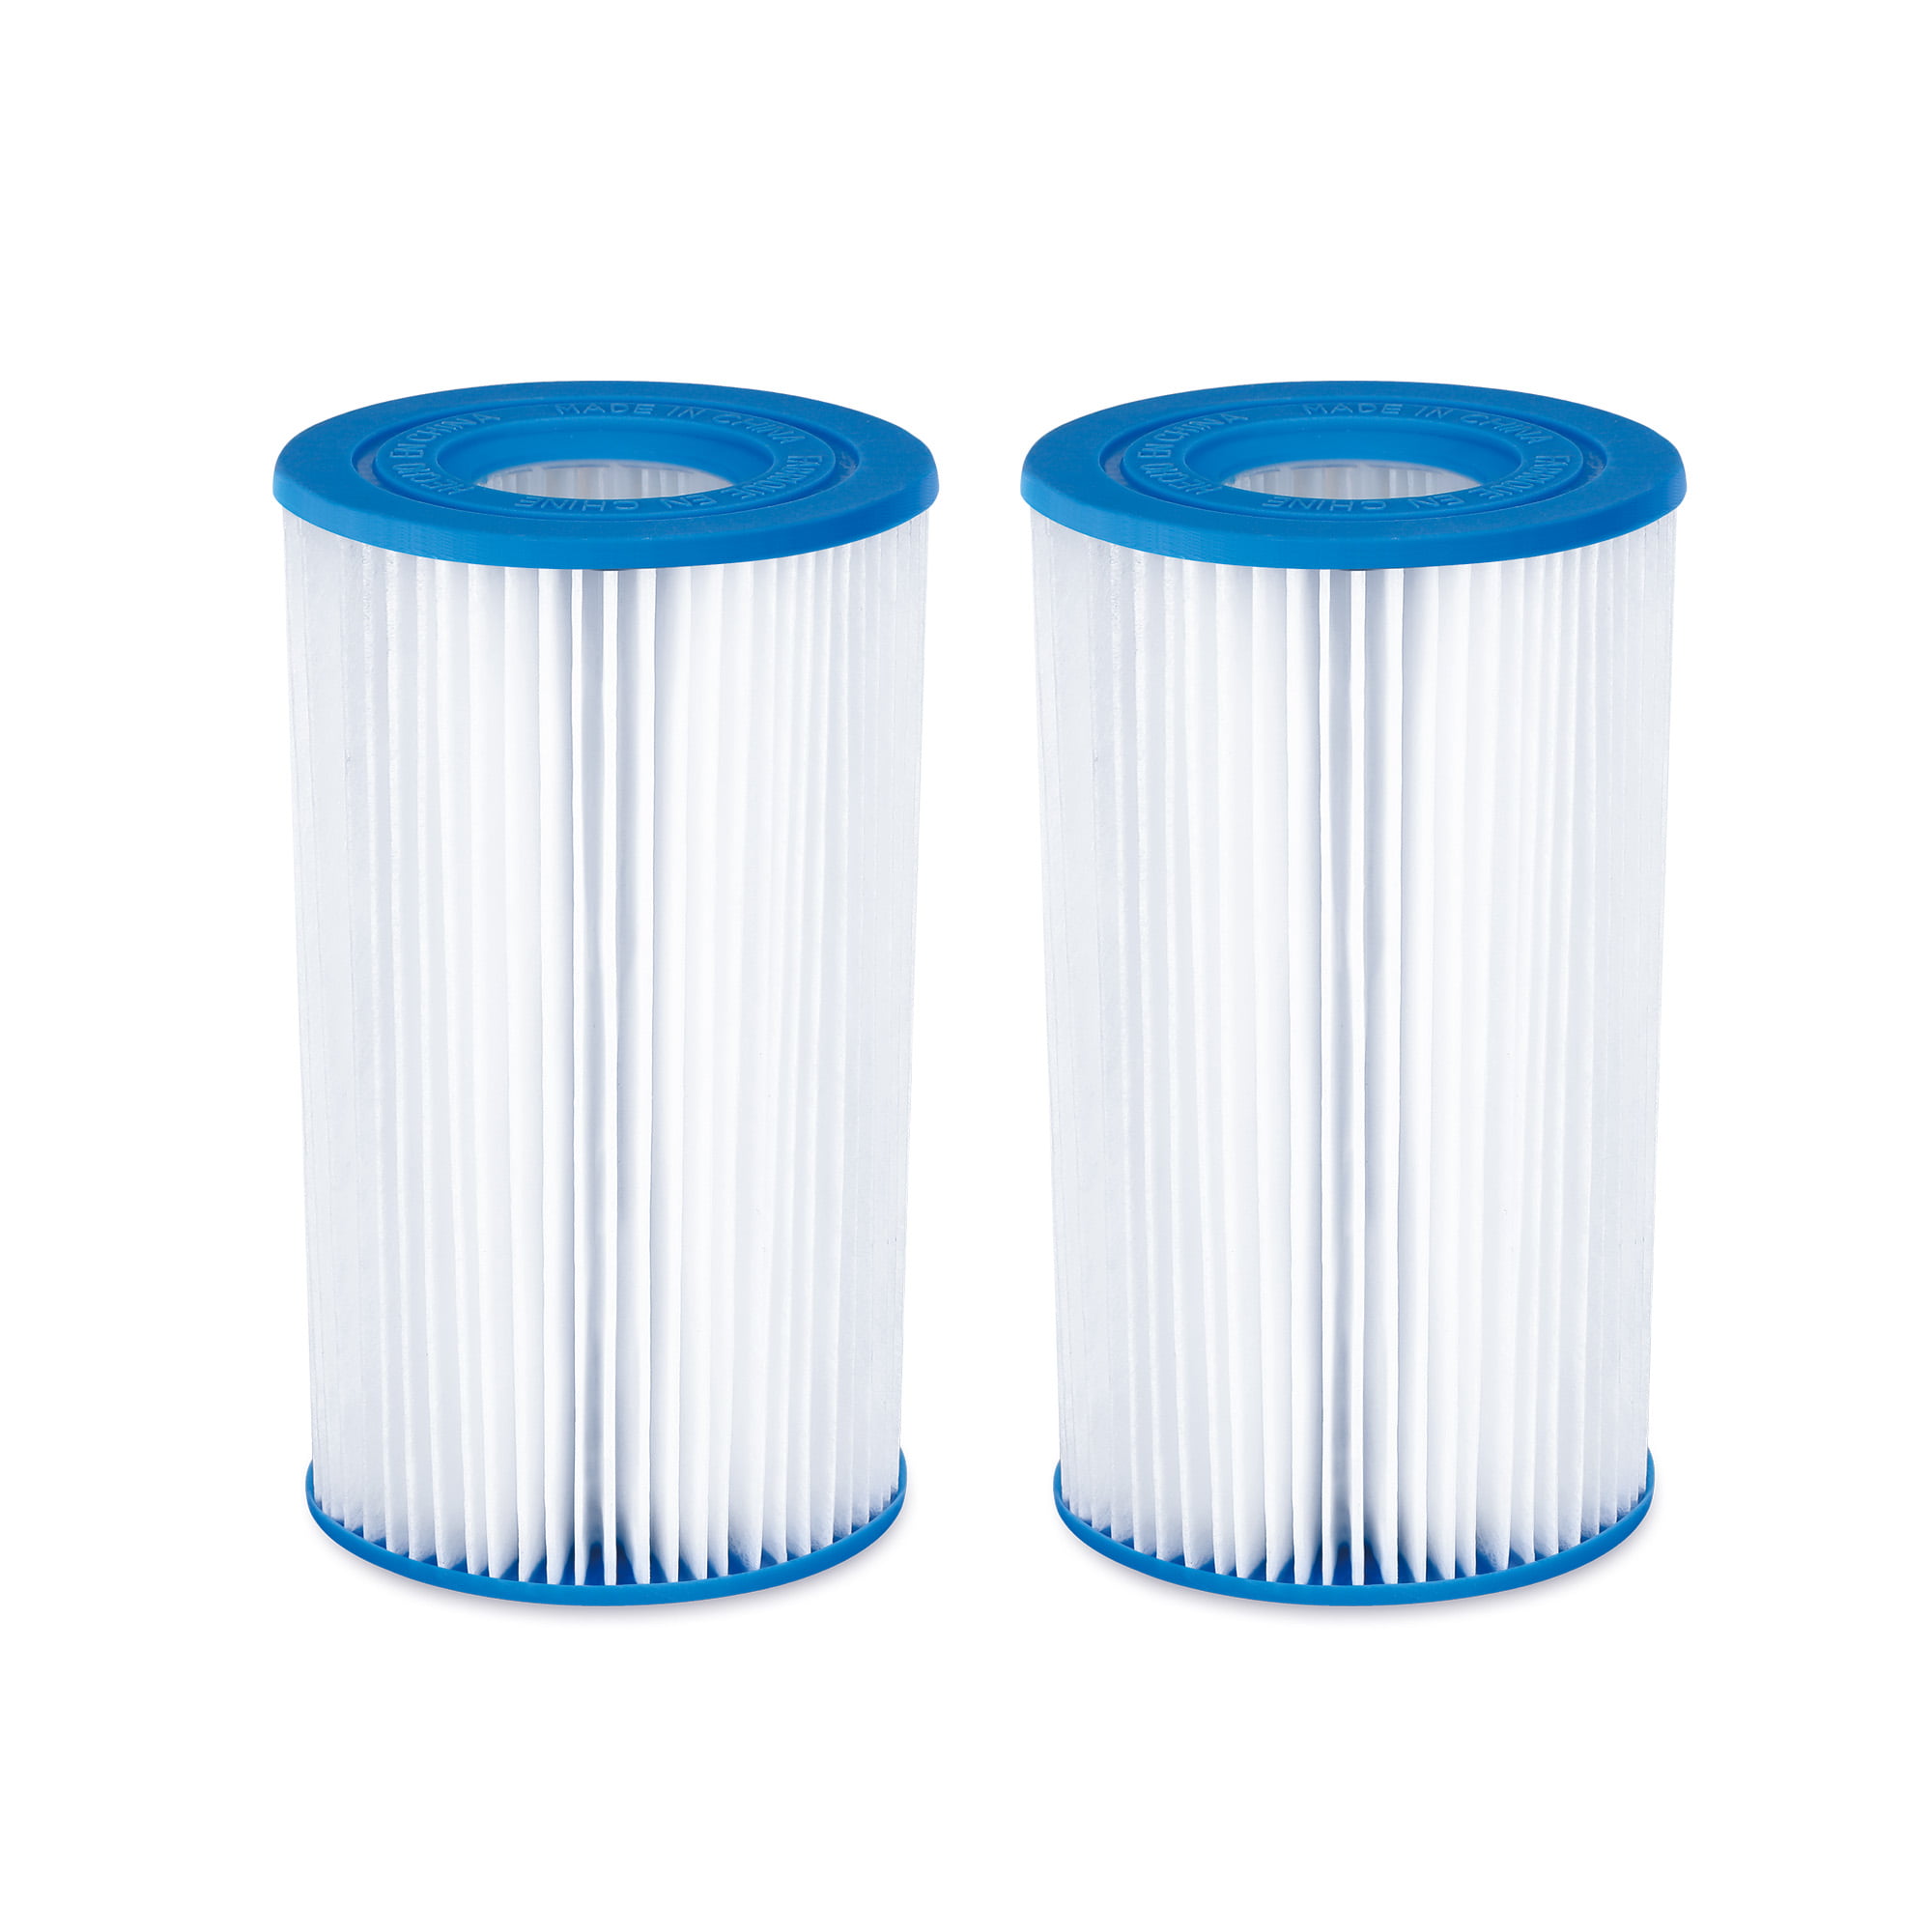 Summer Waves Type A/C Swimming Pool Pump Filter Cartridge Pack of 2 